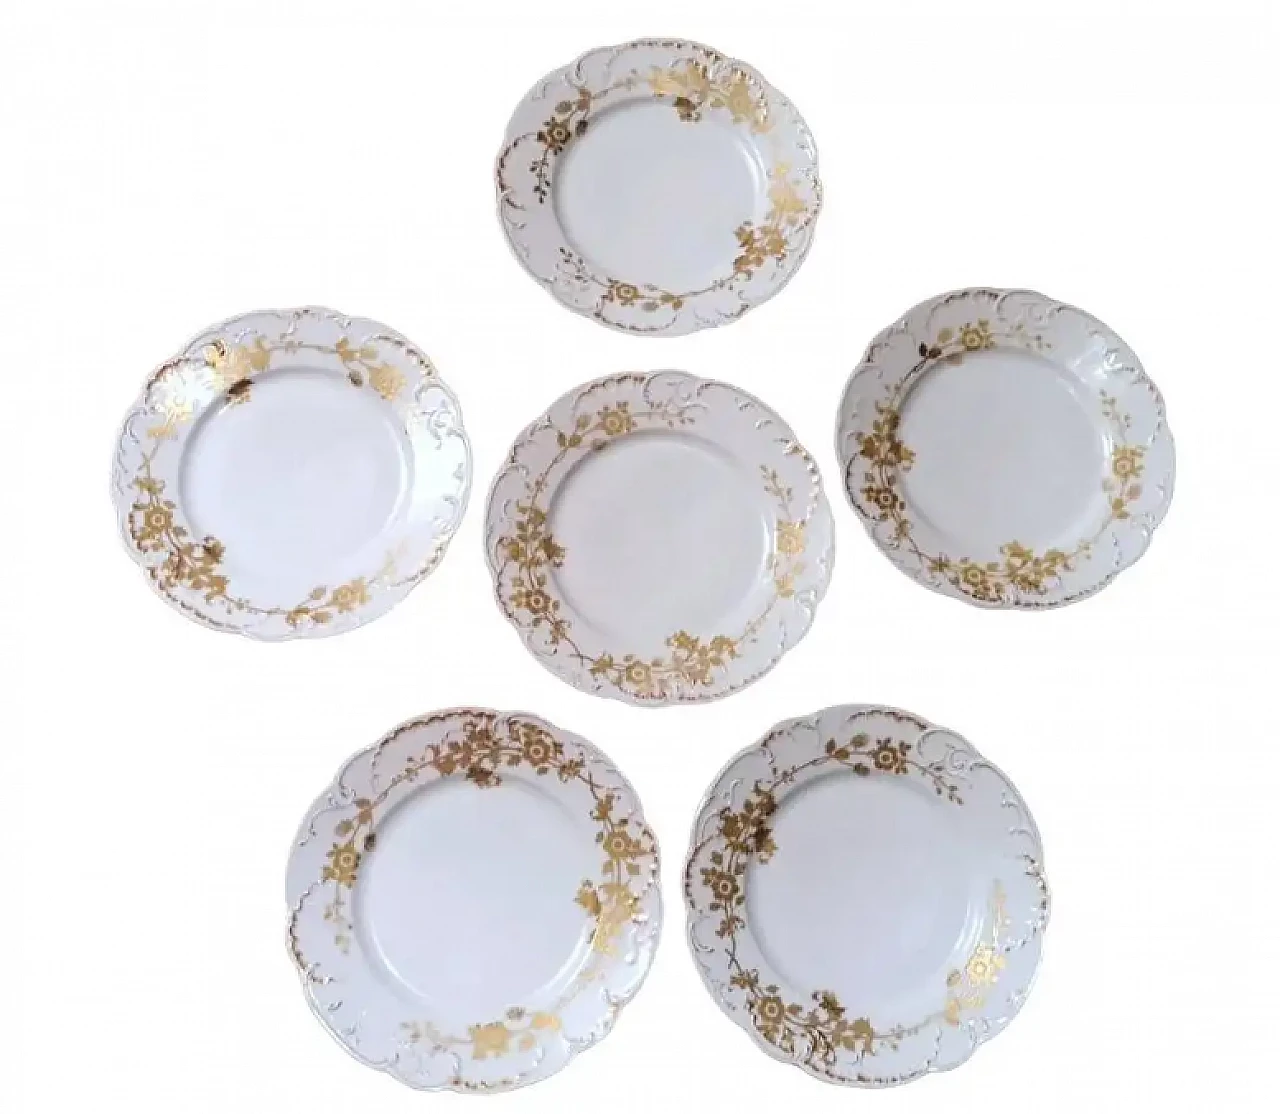 6 Flat plates in white Limoges porcelain with gilded decoration by Haviland, early 20th century 1